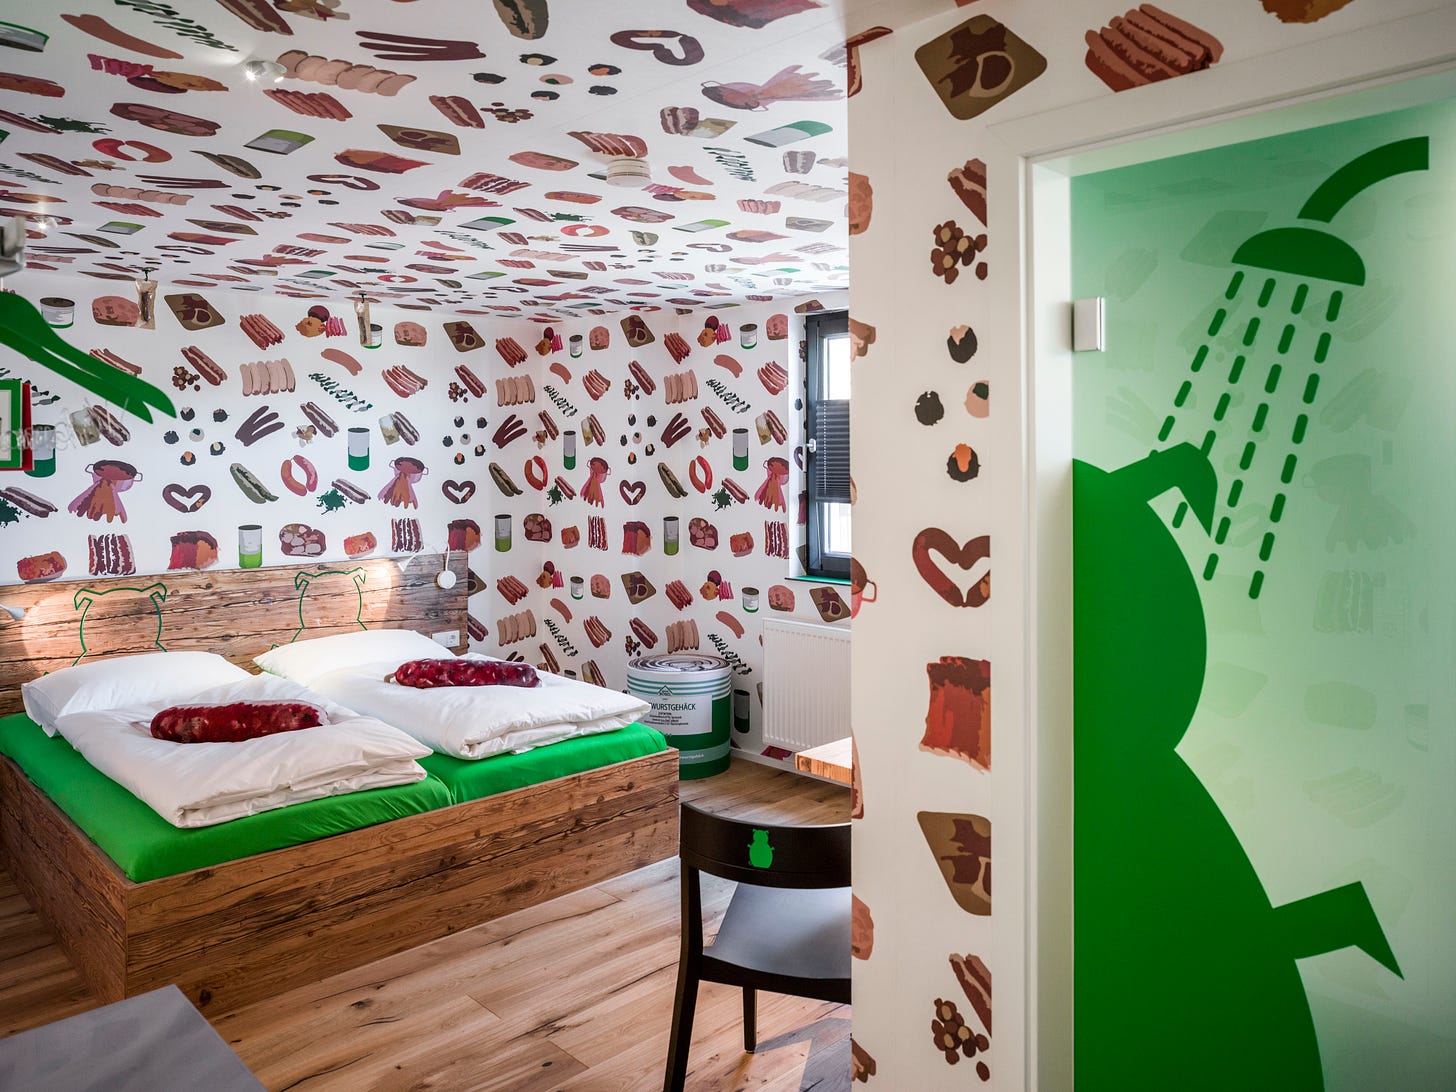 A hotel room with pictures of various sausages all over the walls and ceiling. There is a double wooden bed with bright green sheets and the bathroom door has a picture of a green pig in a shower on it.